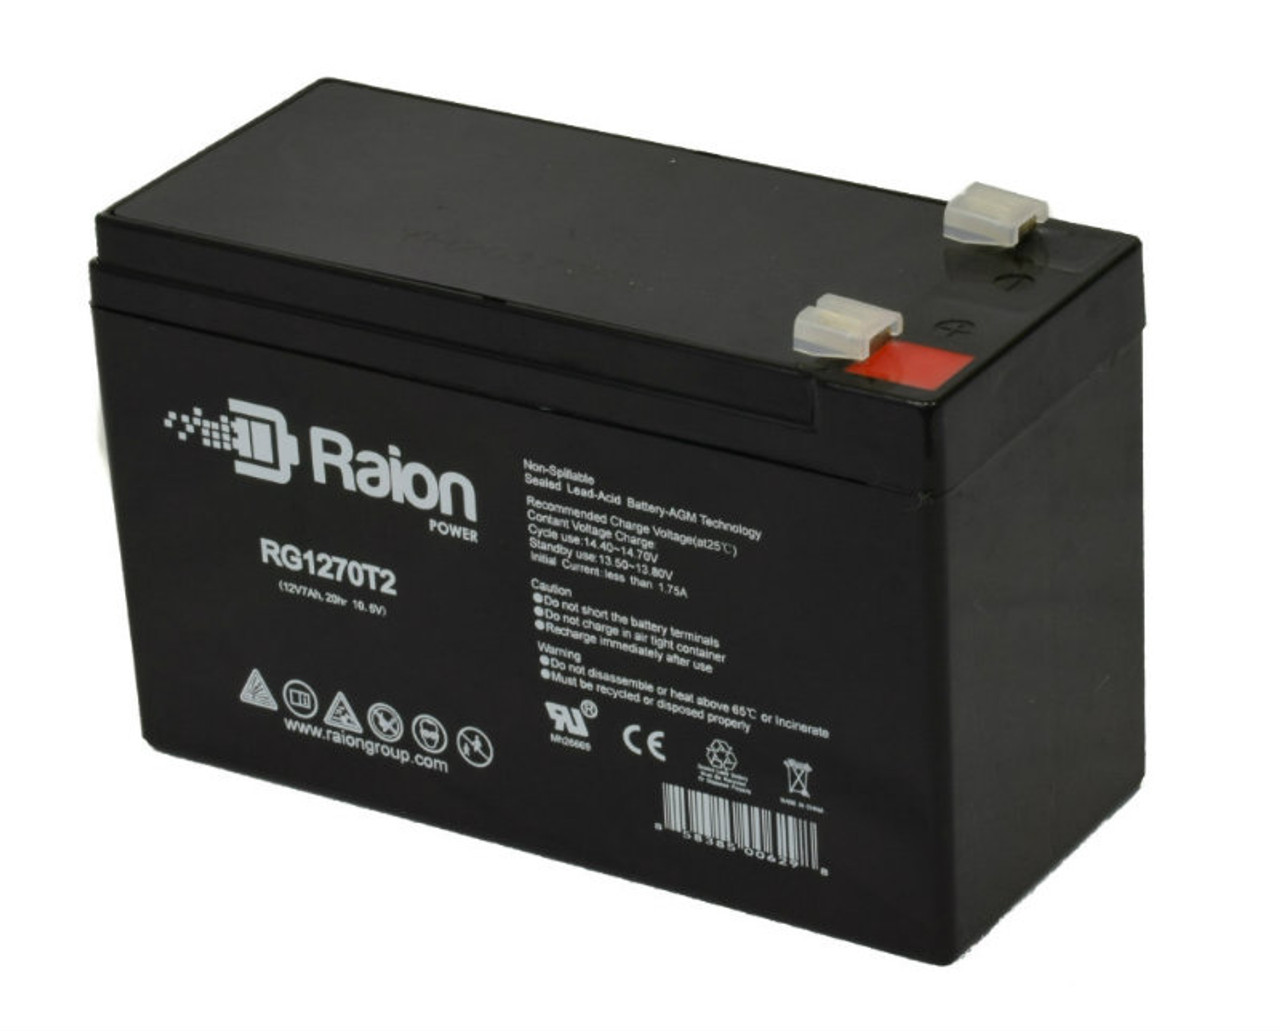 Raion Power RG1270T1 12V 7Ah Non-Spillable Replacement Battery for Newmox FNC-1270